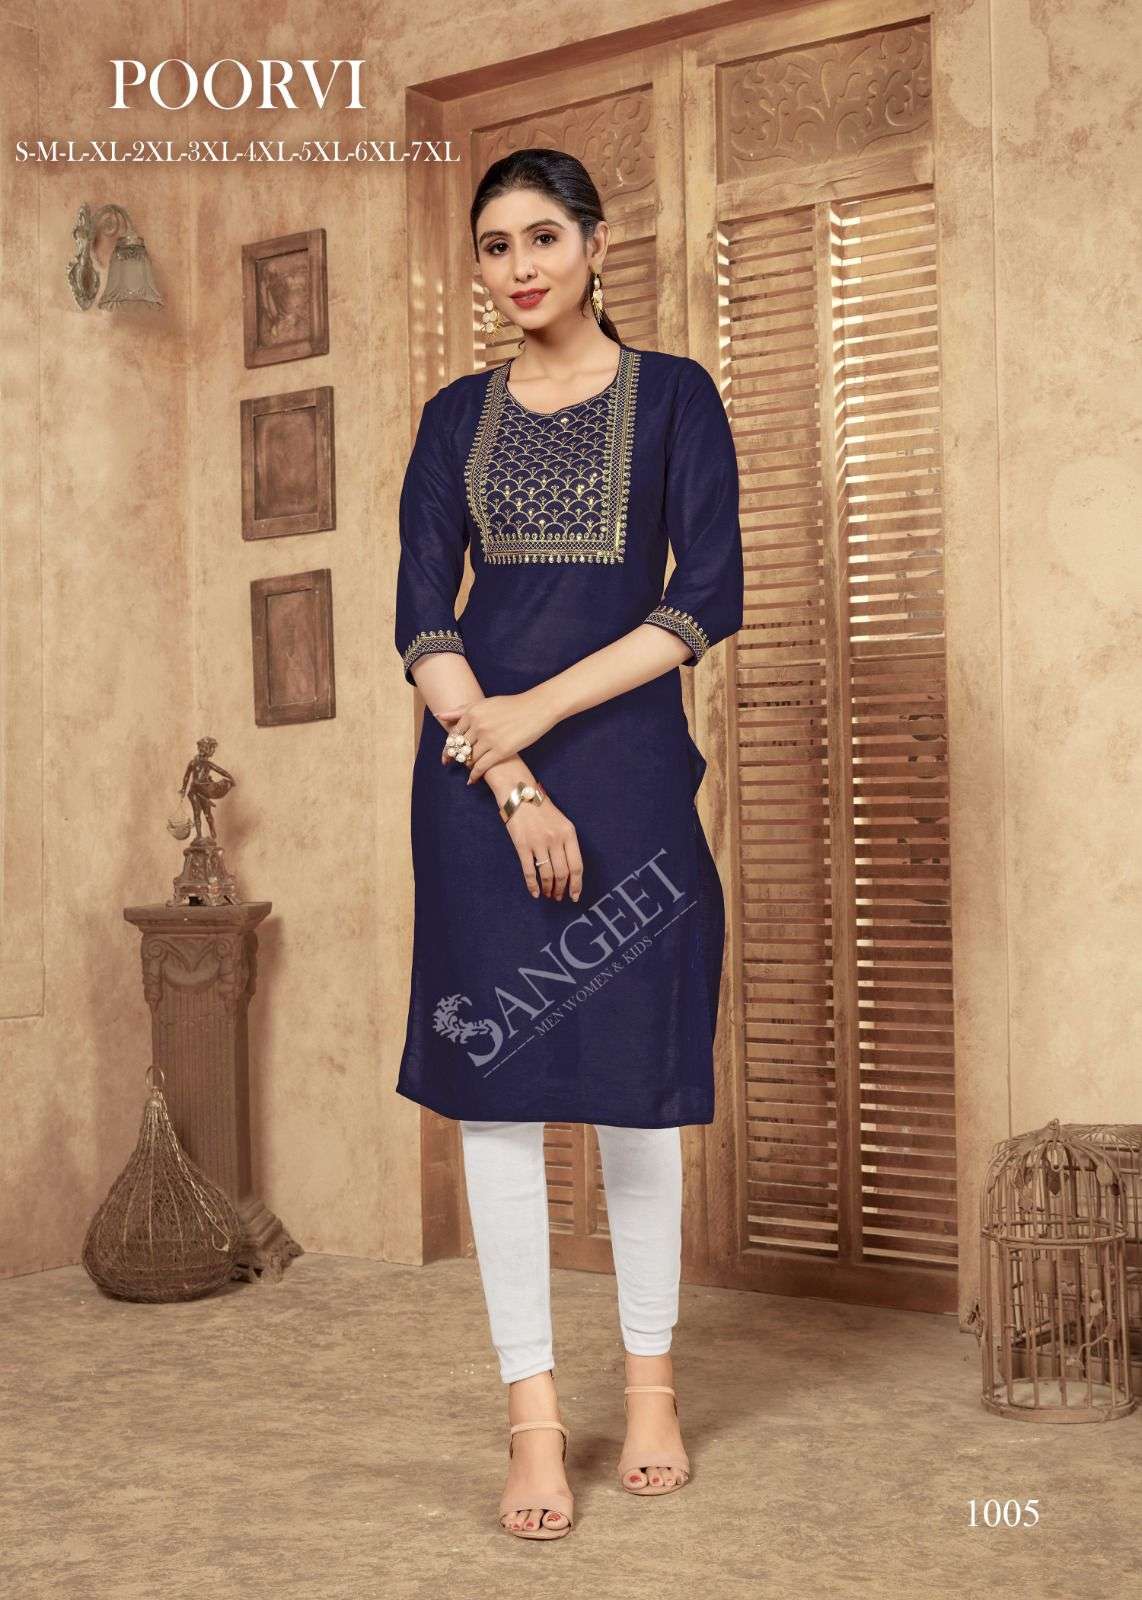 poorvi heavy rayon with embroidery sequence work dresigner kurti wholesale